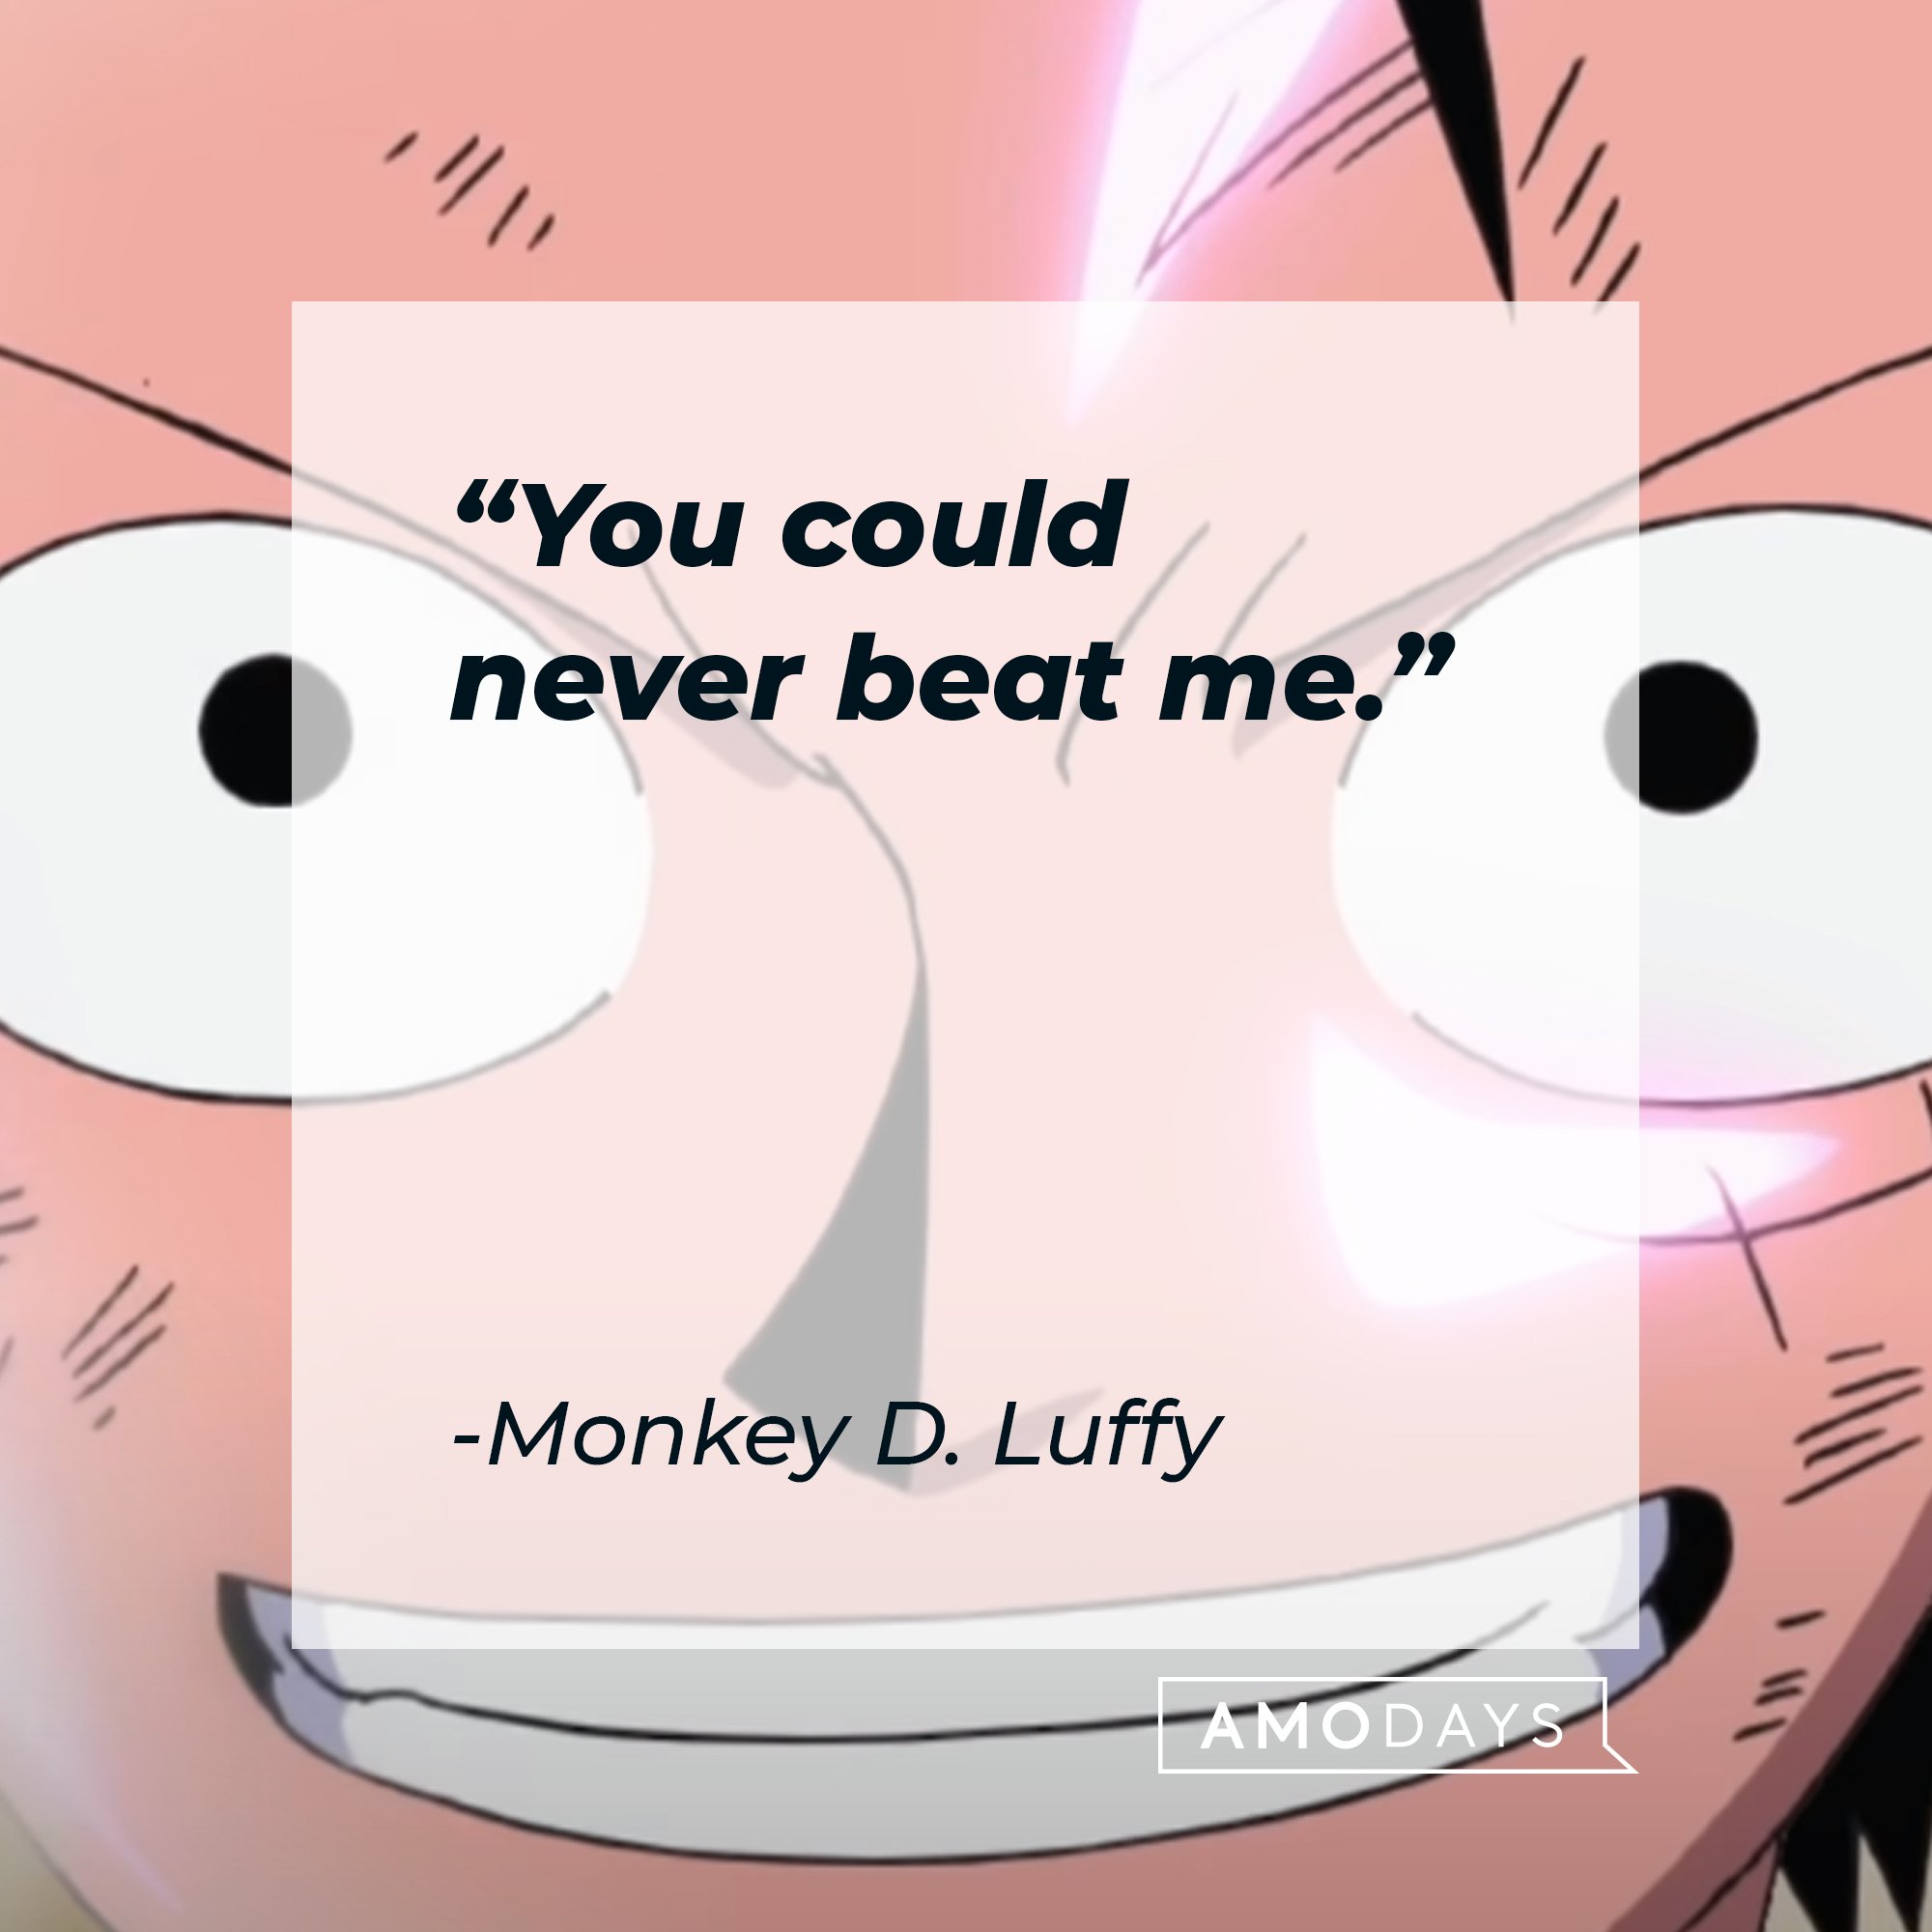 Monkey D. Luffy's quote: "You could never beat me." |  Image: AmoDays